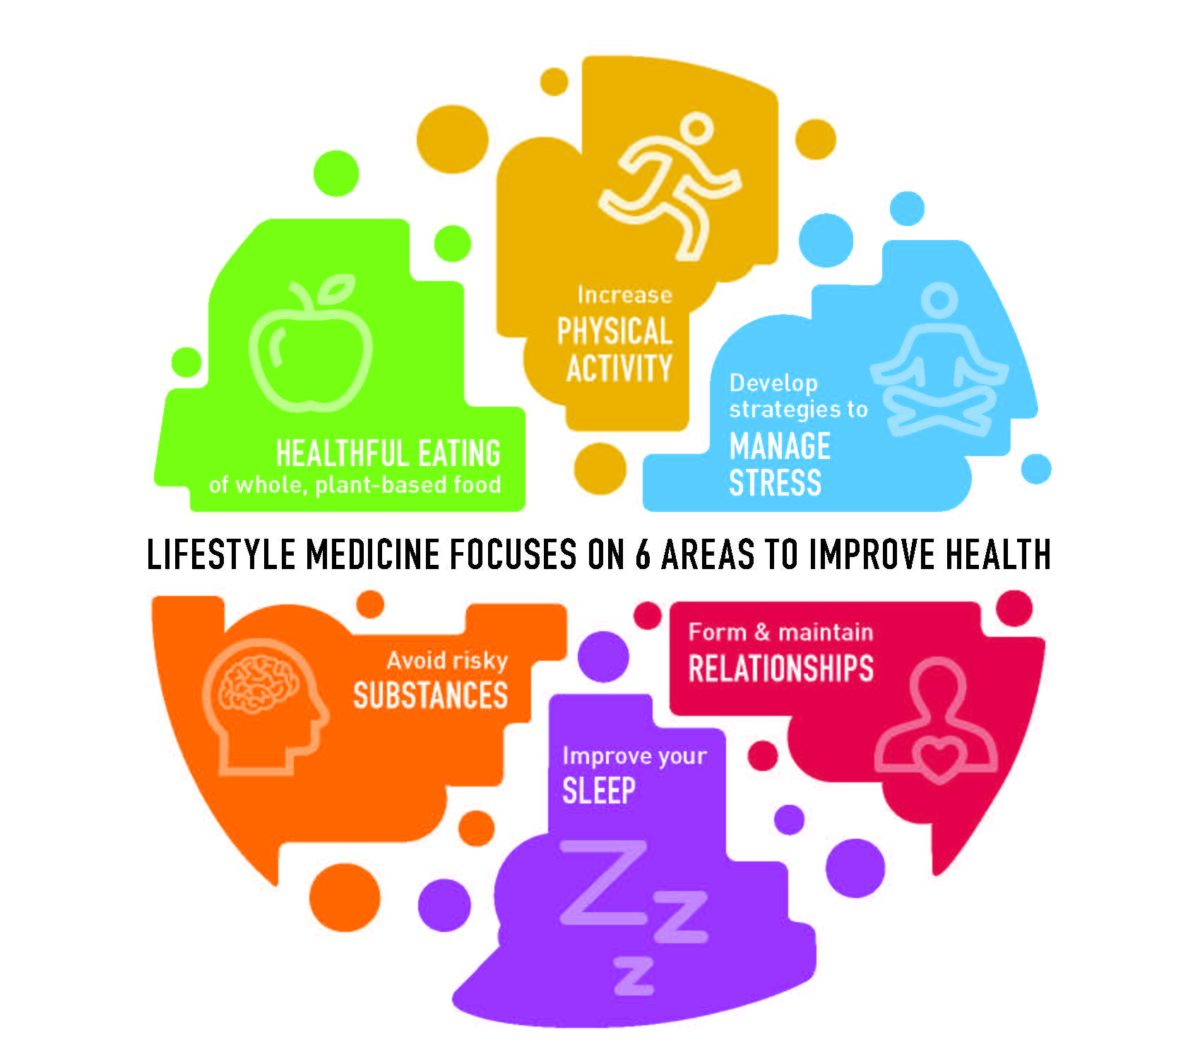 American College of Lifestyle Medicine 6 areas to improve health image to accompany the article Minding the Buddhist Roots of Westernized Mindfulness Training